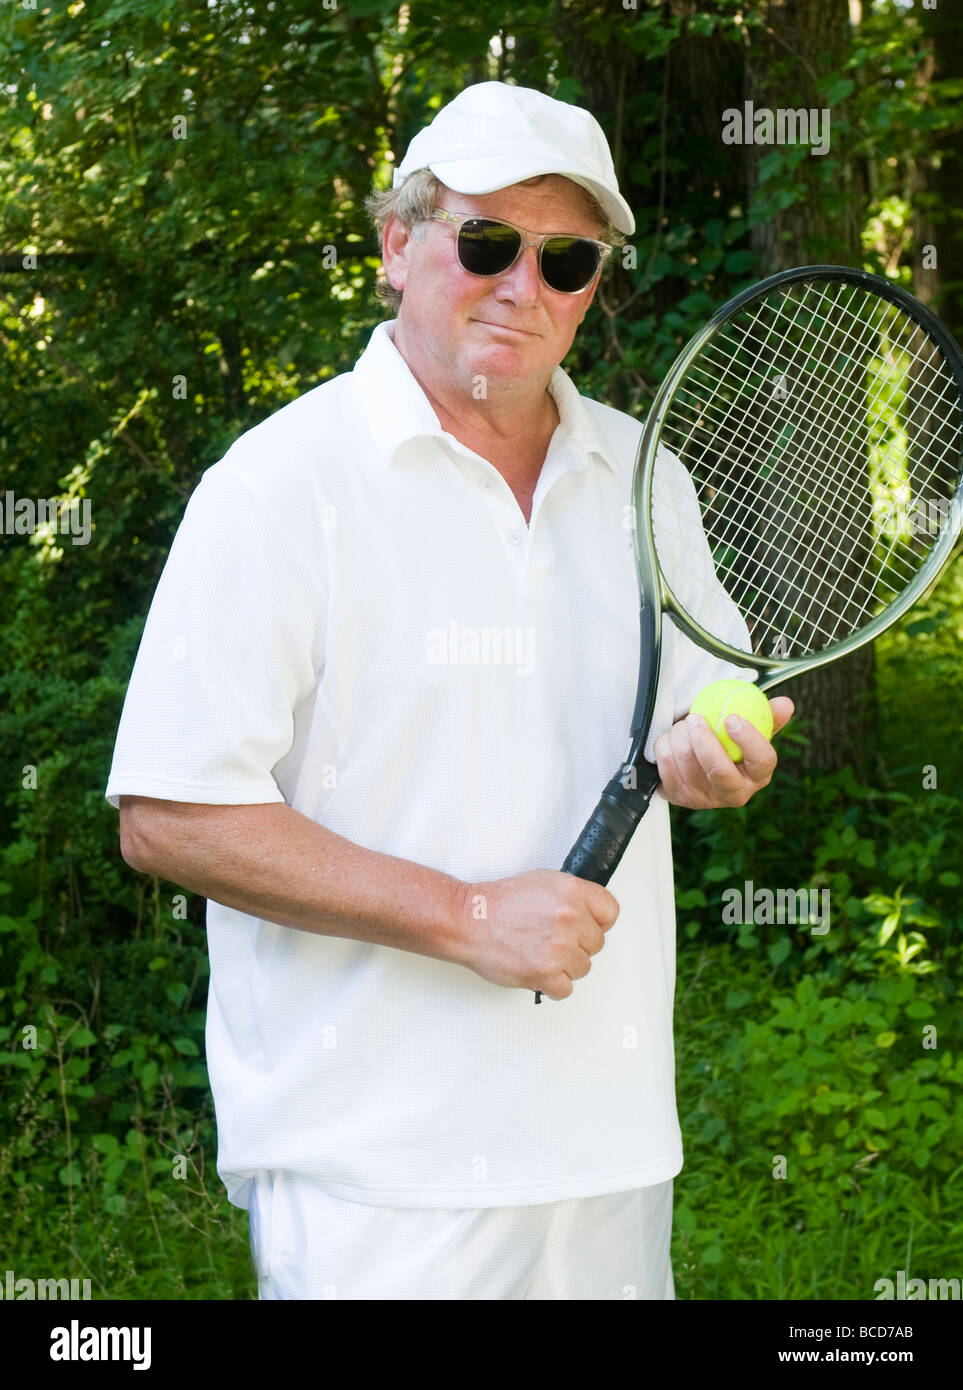 man middle age aged senior play racket ball sports fitness exercise health expression facial tennis player clothes white polo sh Stock Photo